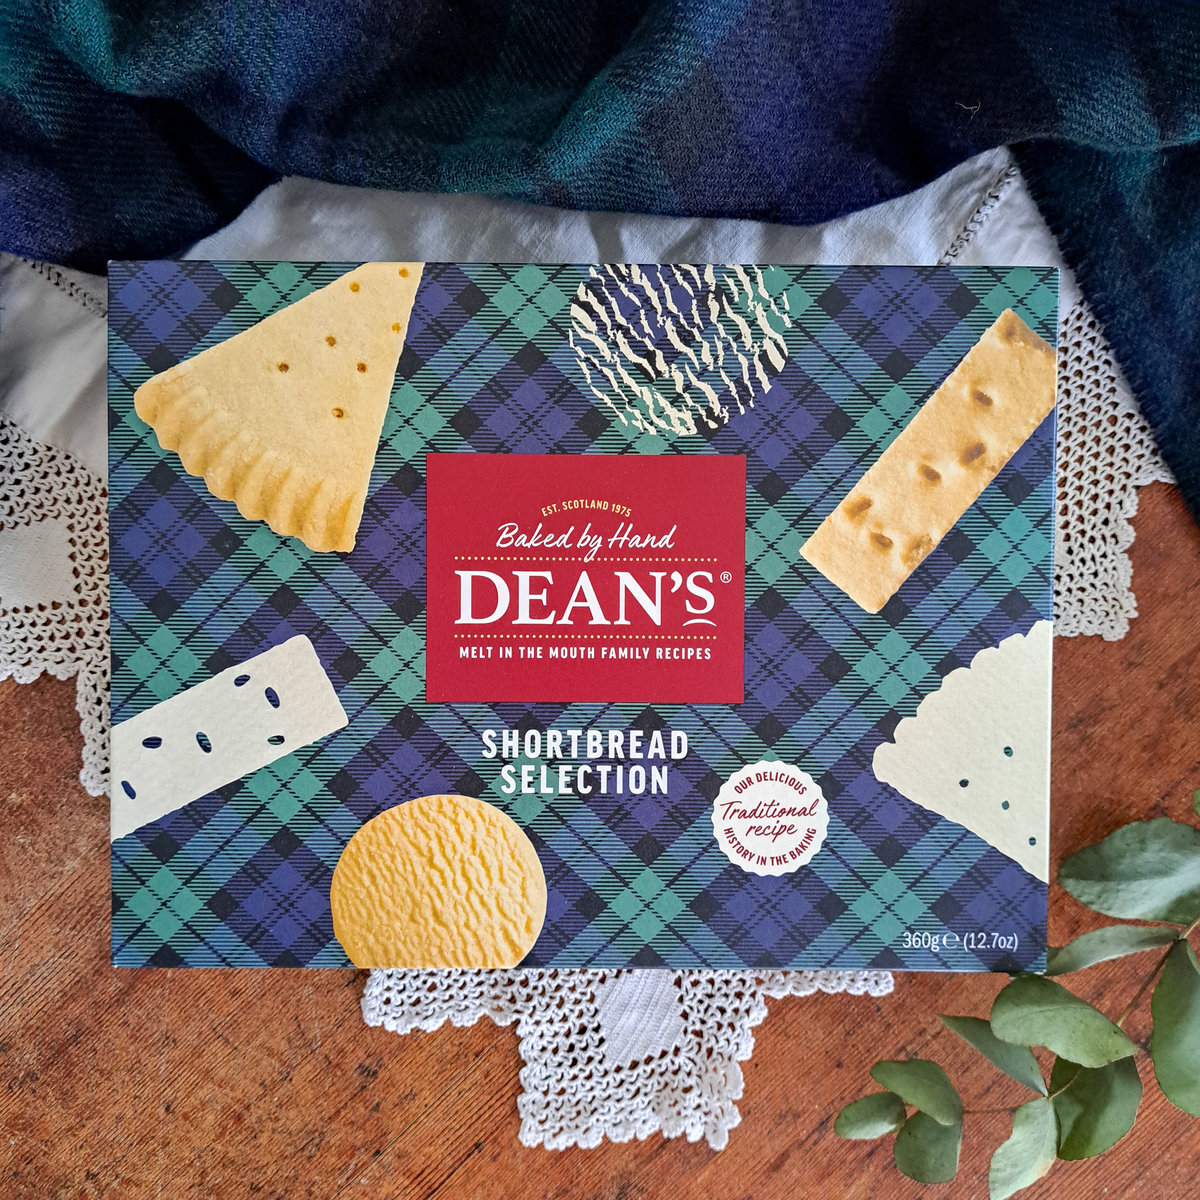 Buy the Shortbread Selection 360g online at Dean's